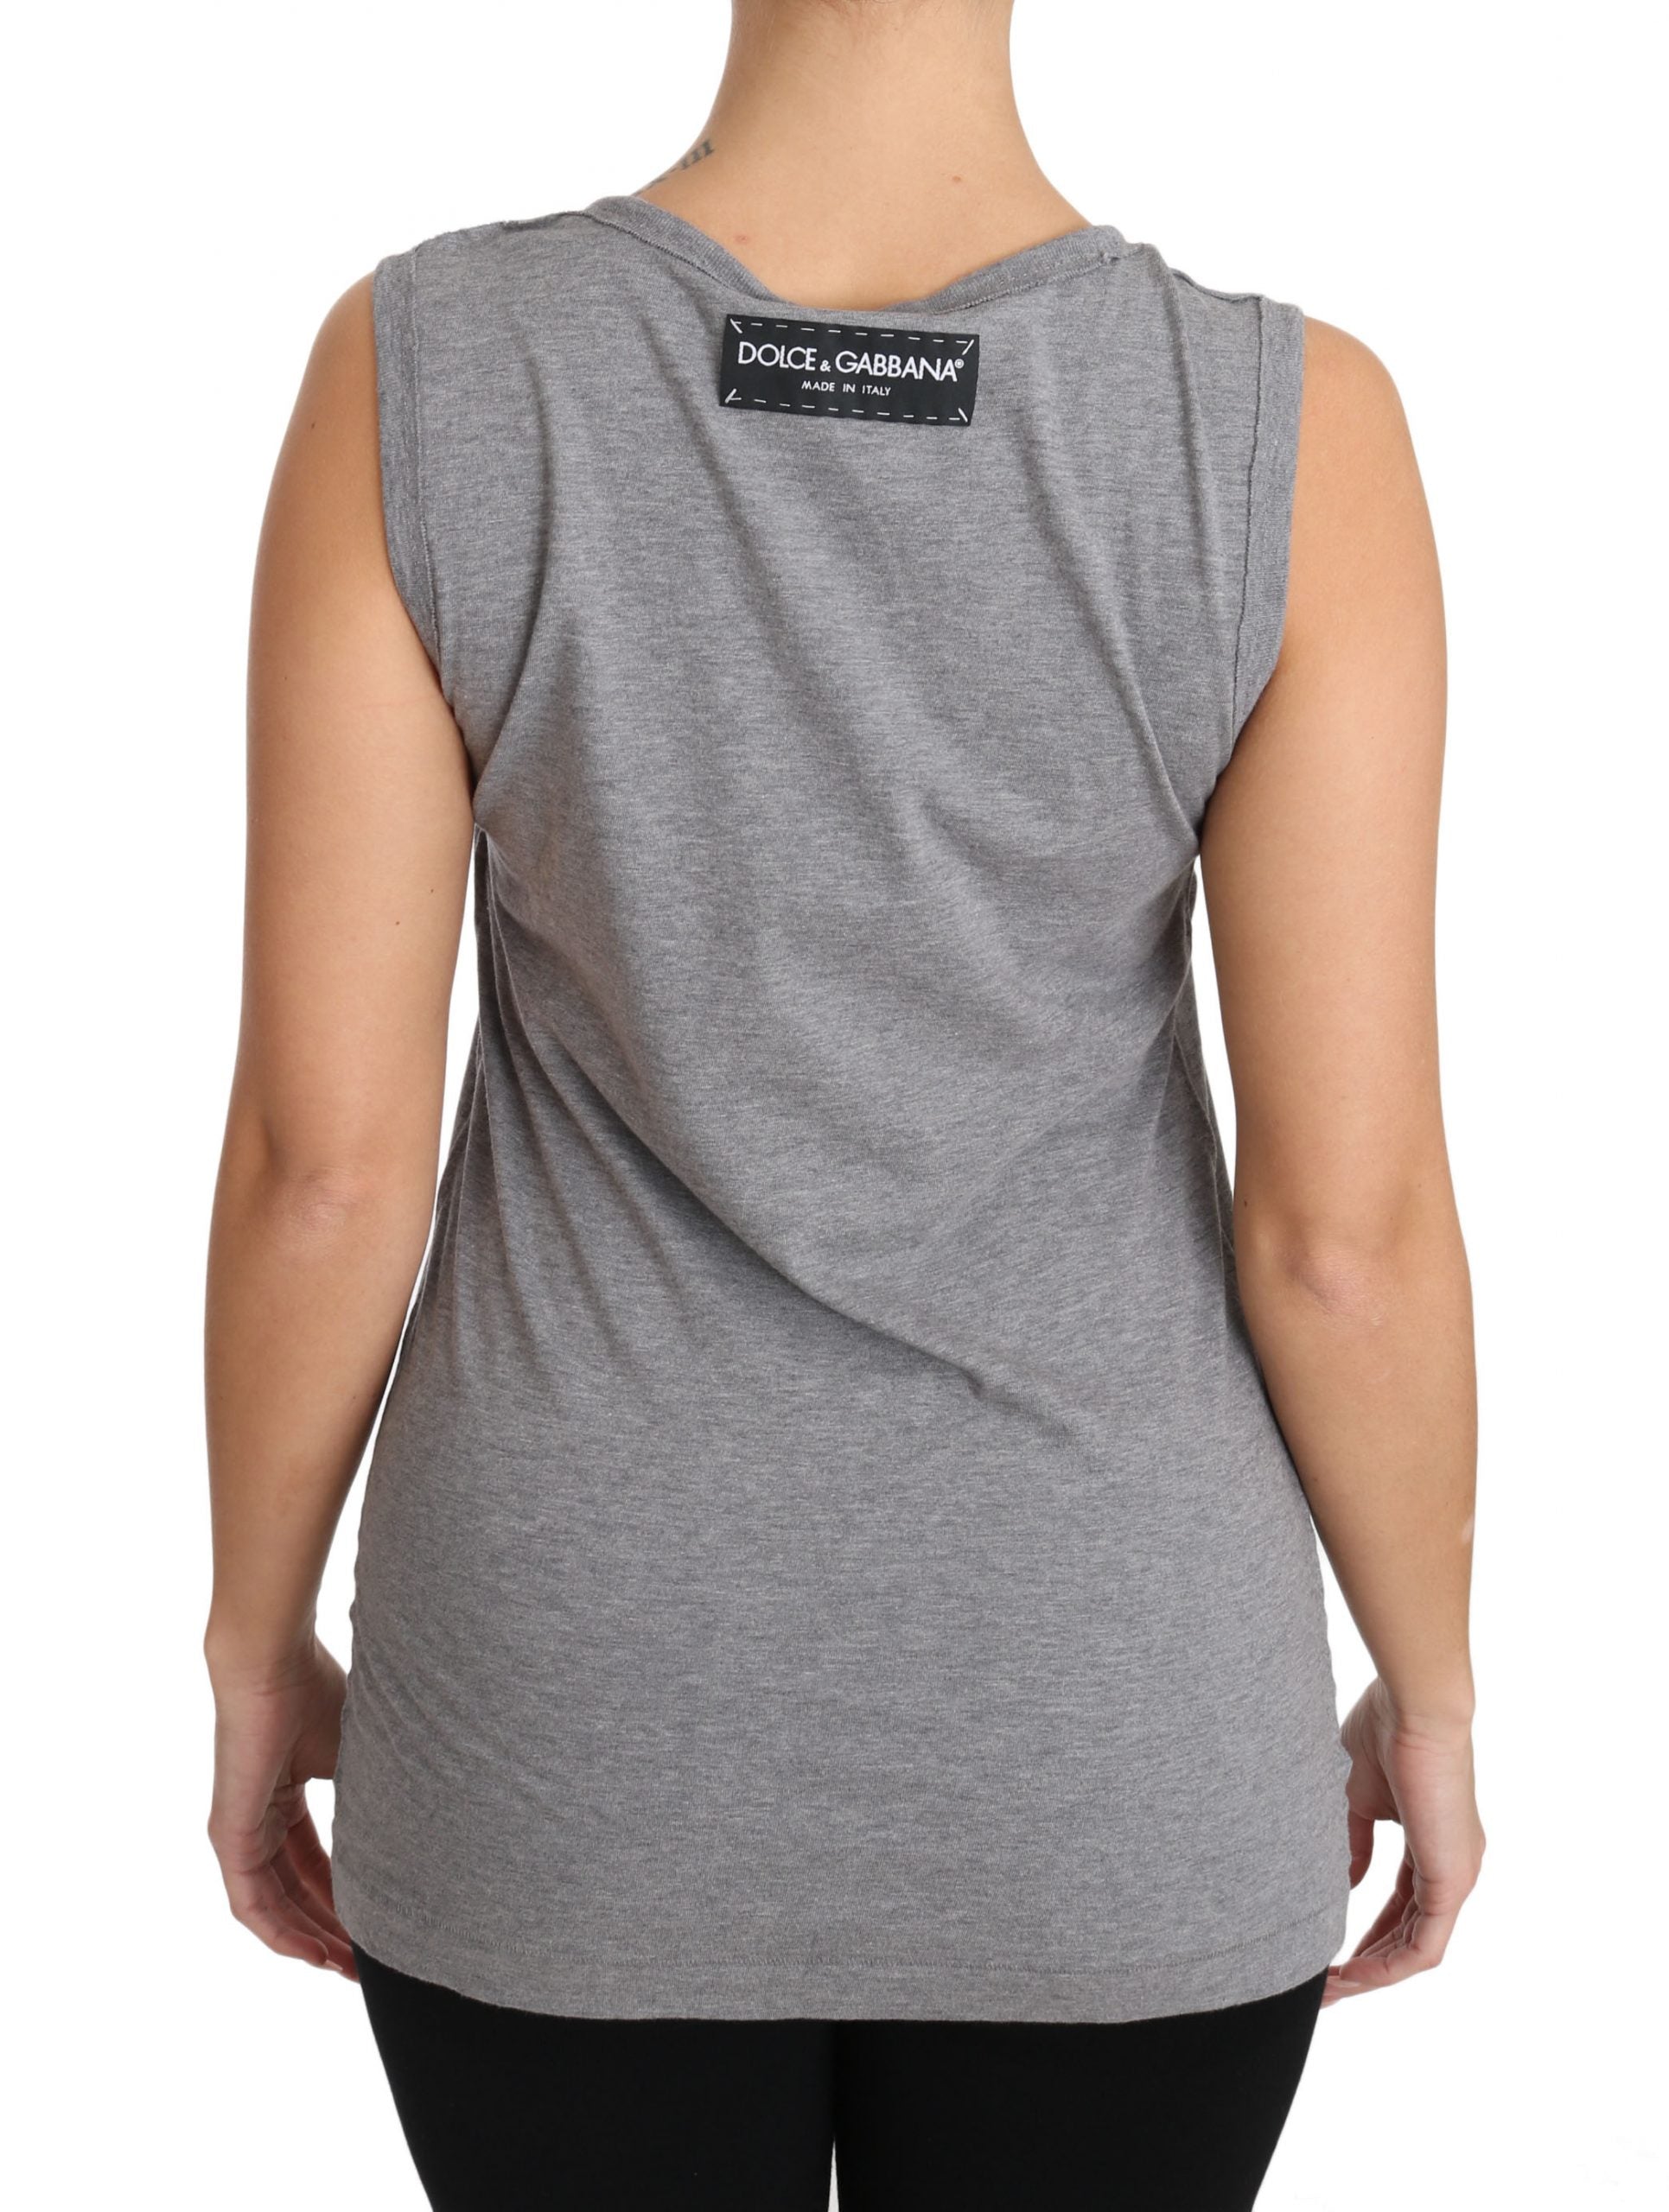 Dolce & Gabbana Sequined Heart Tank Top in Gray